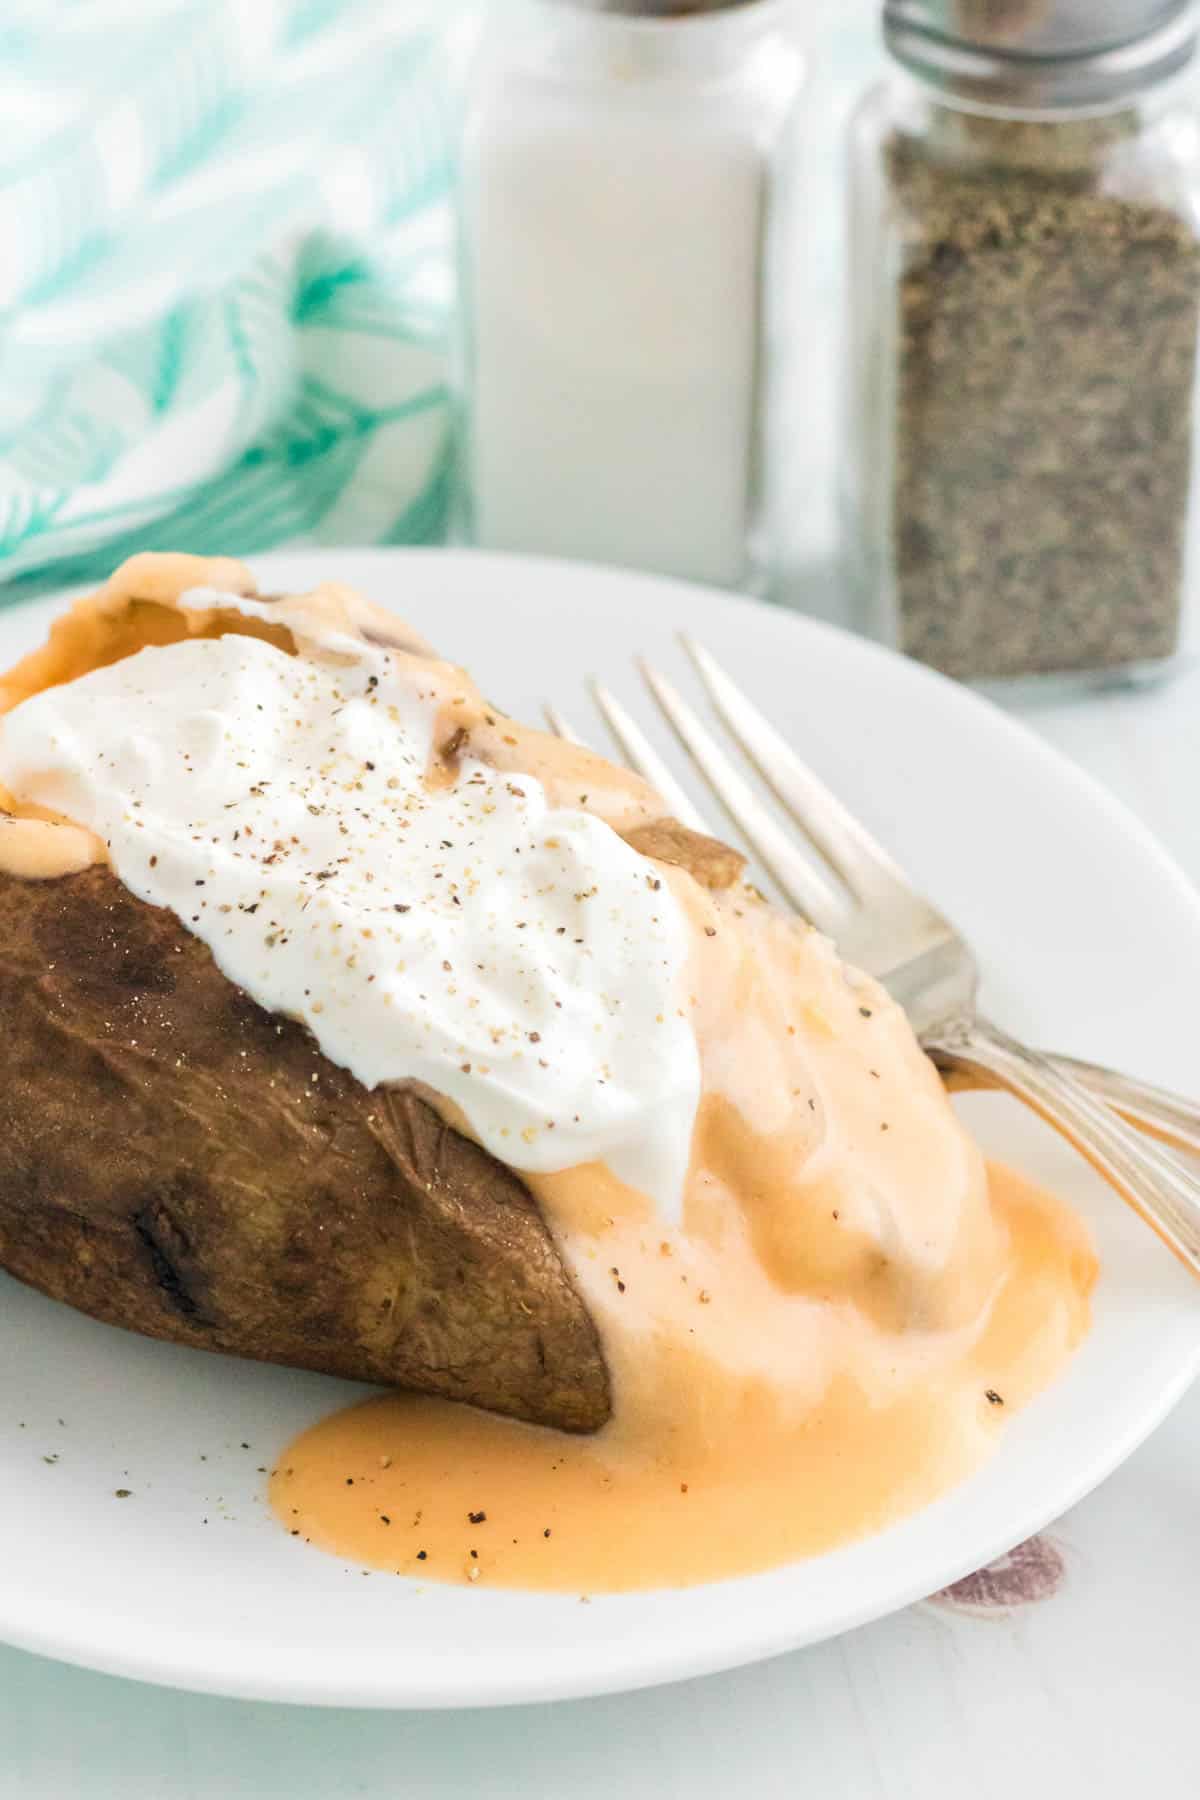 A fully loaded baked potato topped with gluten free cheese sauce and sour cream.